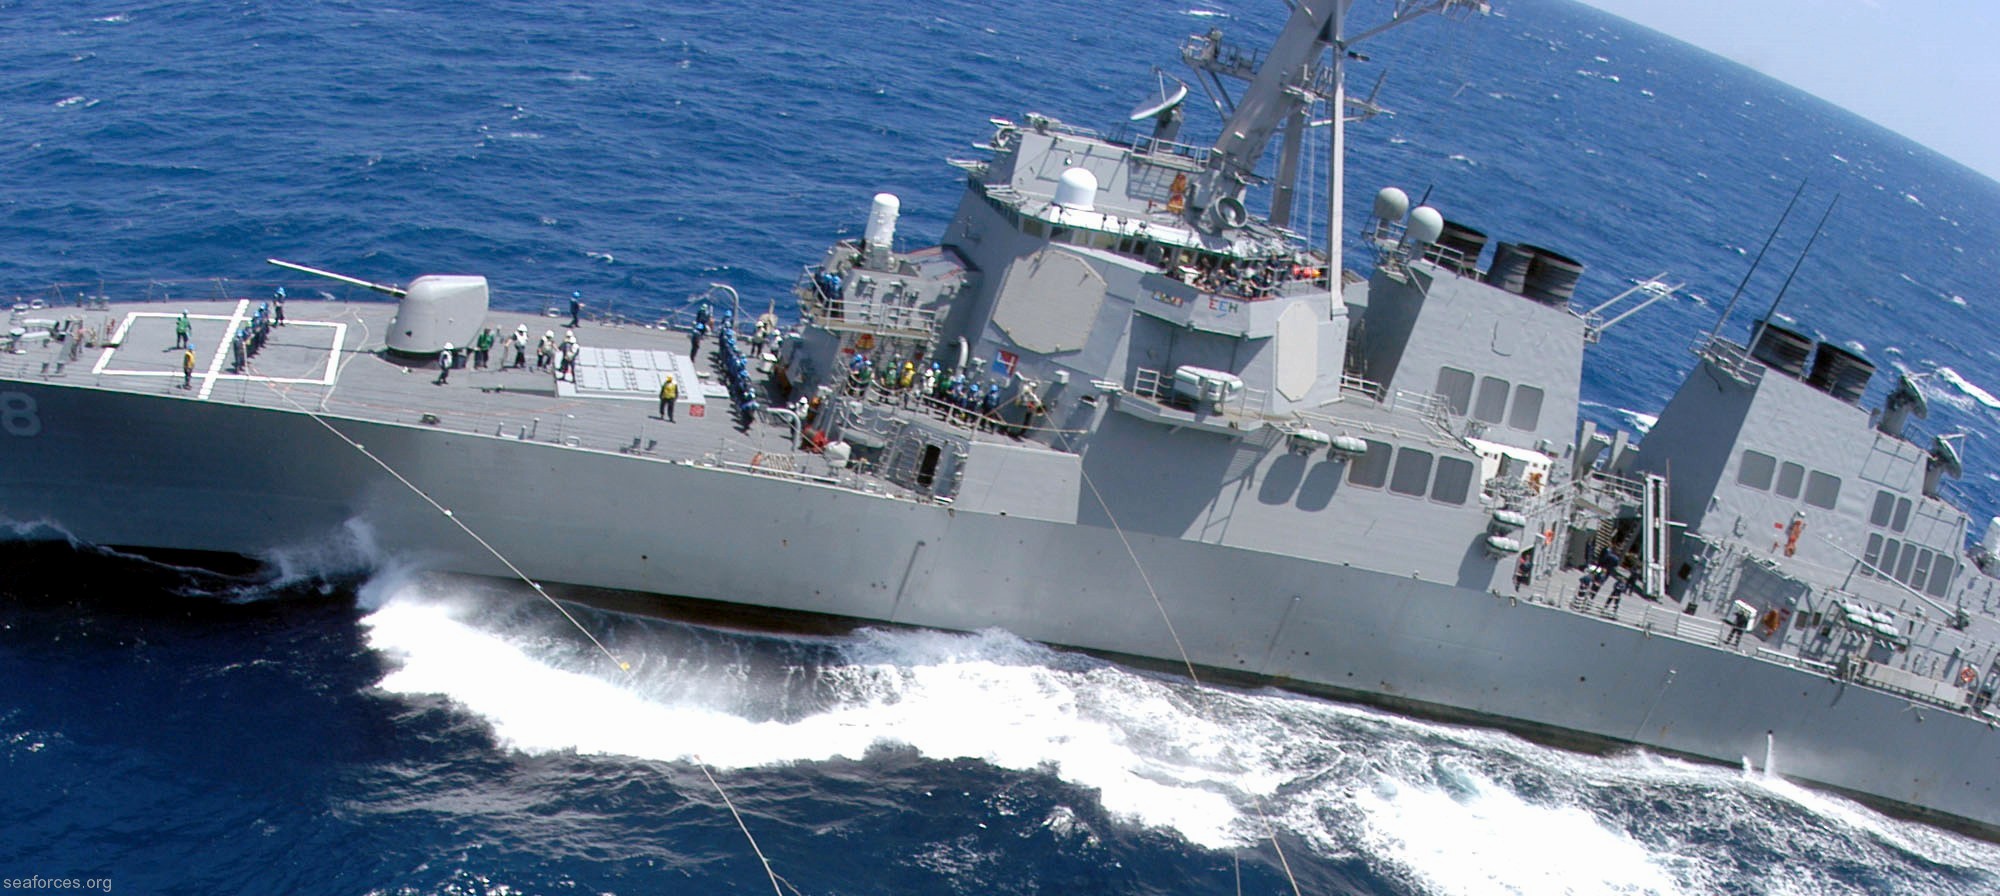 ddg-58 uss laboon guided missile destroyer us navy 69